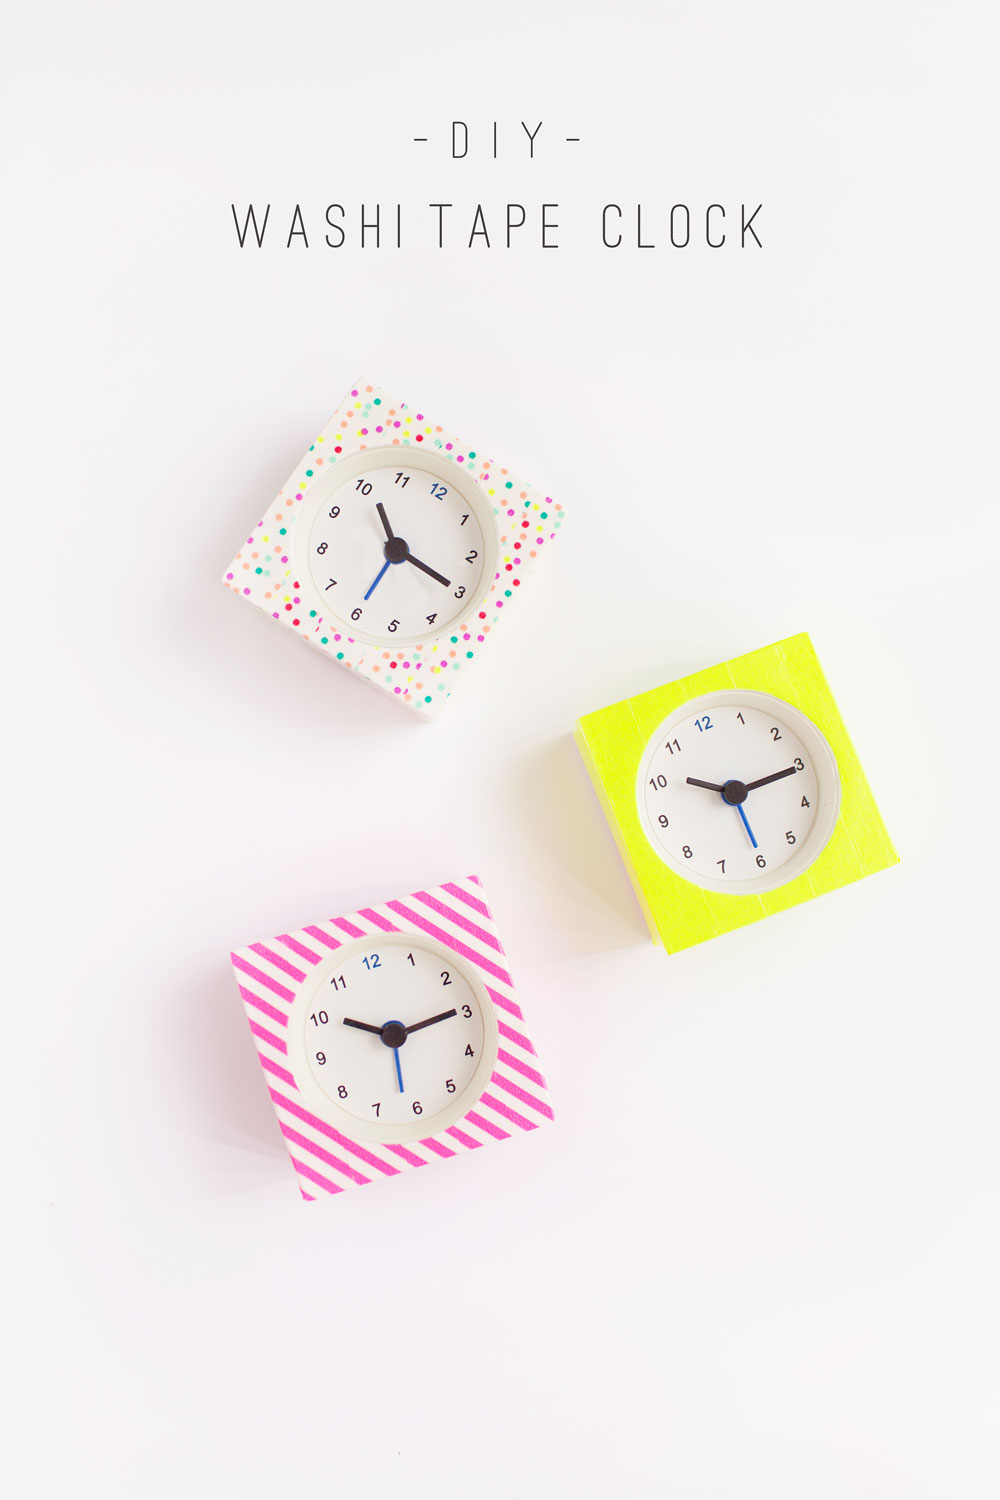 50 Crafts To Make and Sell - Easy DIY Ideas for Cheap Things To Sell on Etsy, Online and for Craft Fairs. Make Money with These Homemade Crafts for Teens, Kids, Christmas, Summer, Mother’s Day Gifts. | DIY Washi Tape Clock #crafts #diy